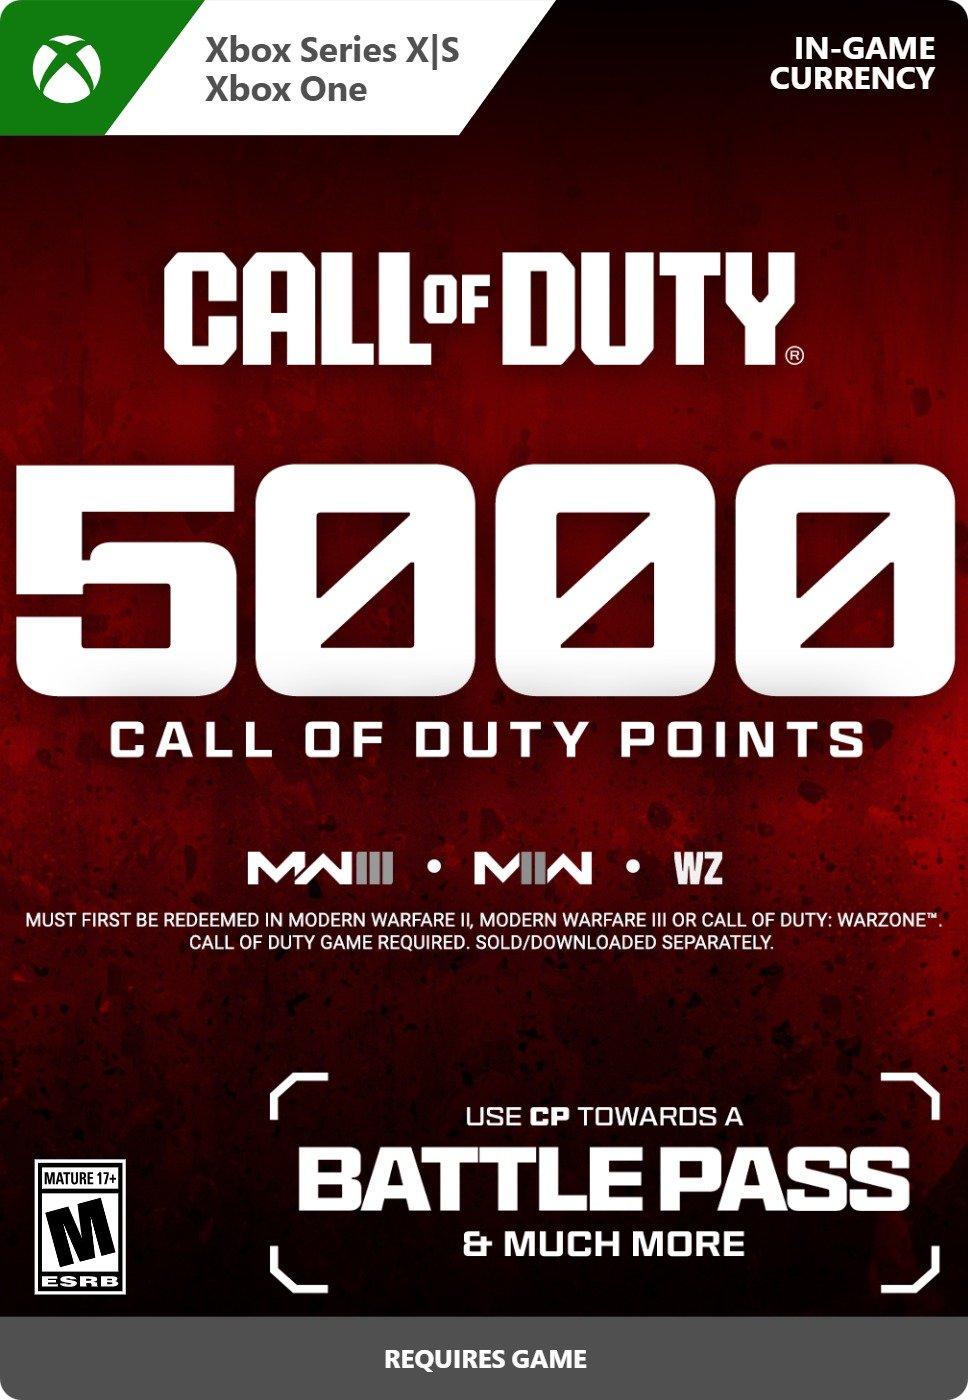 Call of Duty Points 5,000 - Xbox Series X